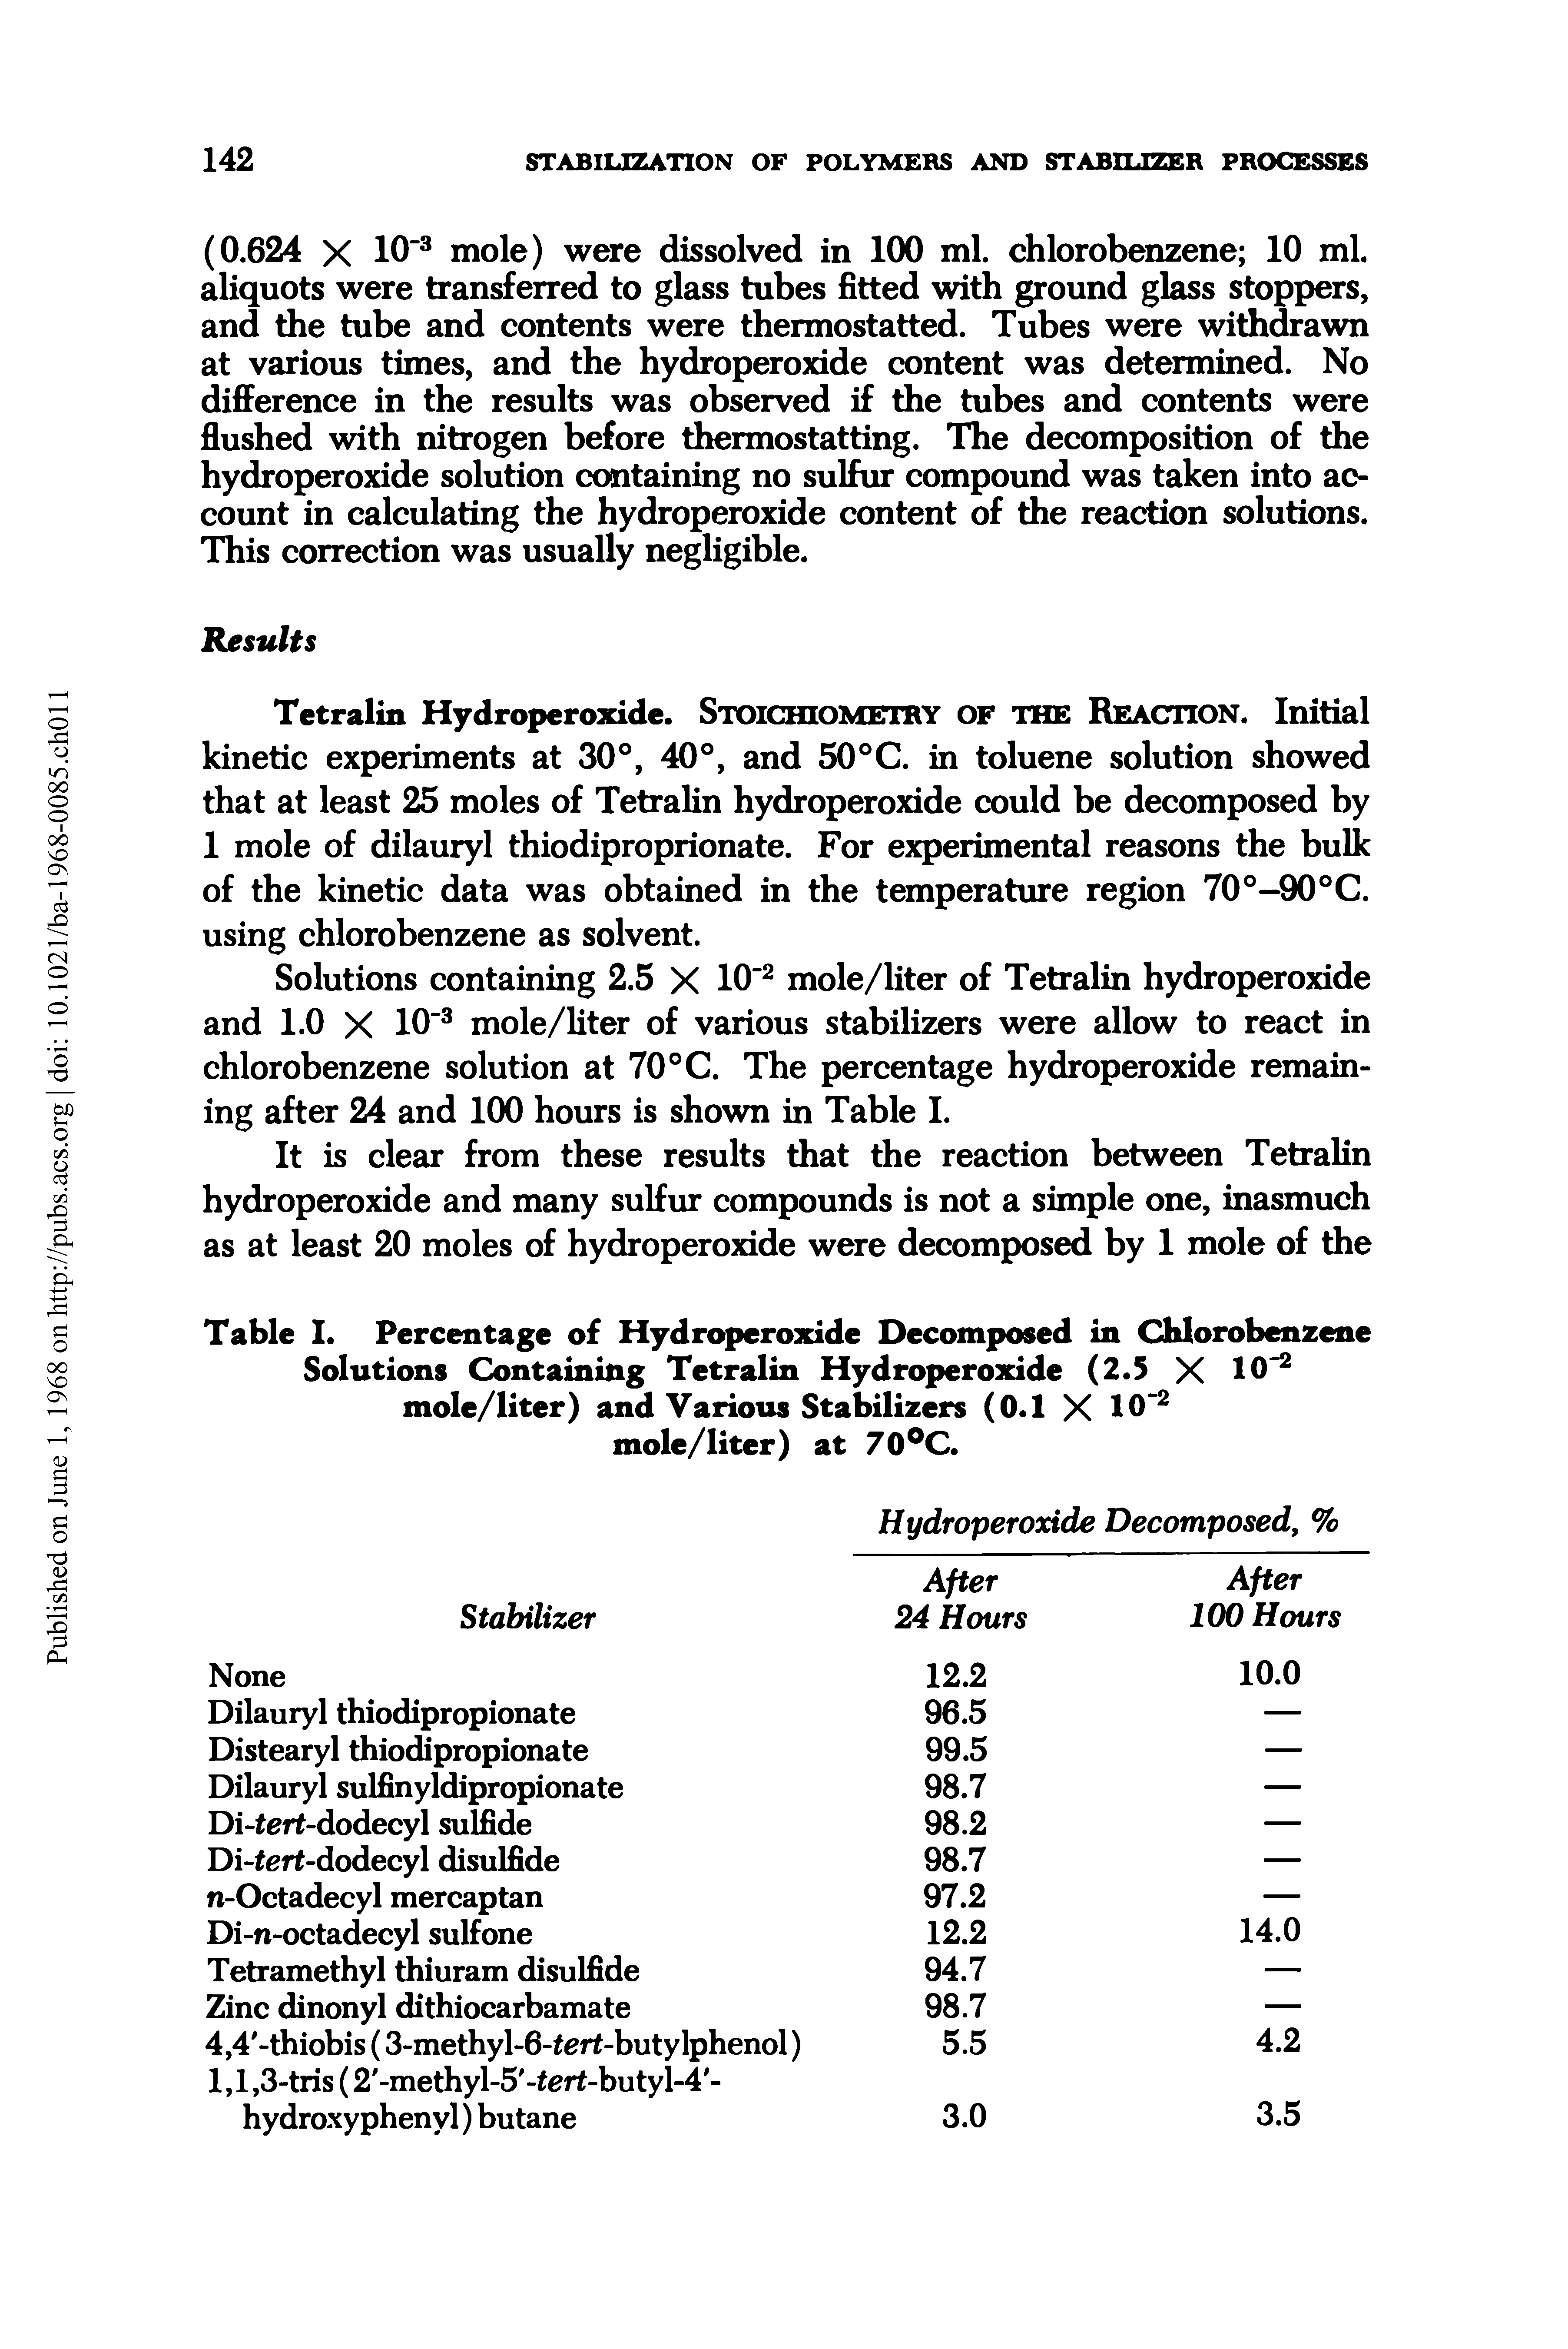 Table I. Percentage of Hydroperoxide Decomposed in Chlorobenzene Solutions Containing Tetralin Hydroperoxide (2.5 X 10-2 mole/liter) and Various Stabilizers (0.1 X 10 2 mole/liter) at 70°C.